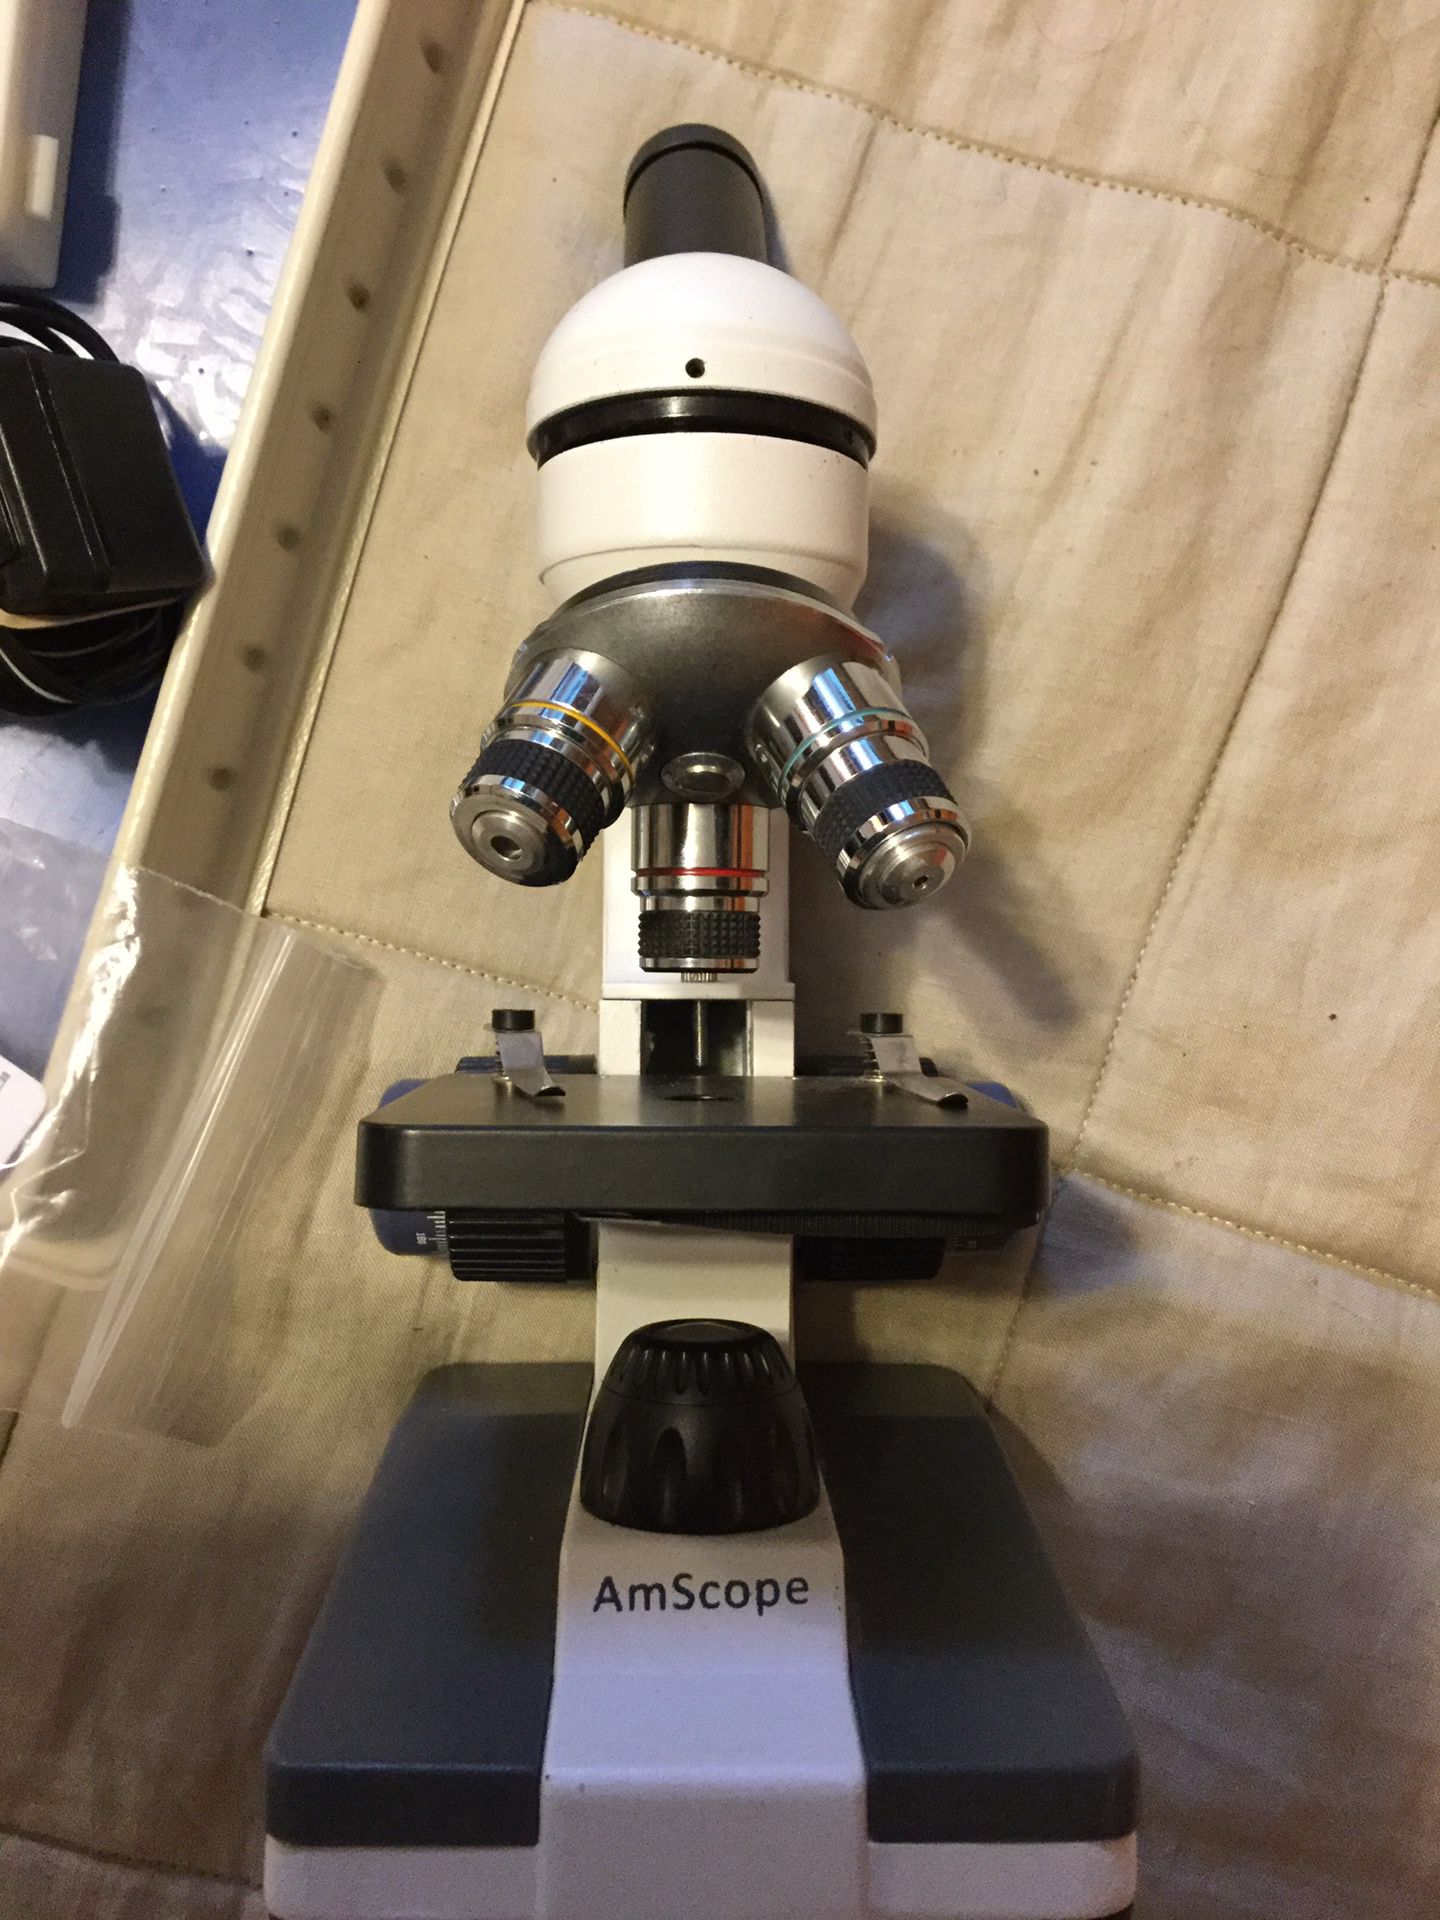 Amscope Microscope and Dissection Kit